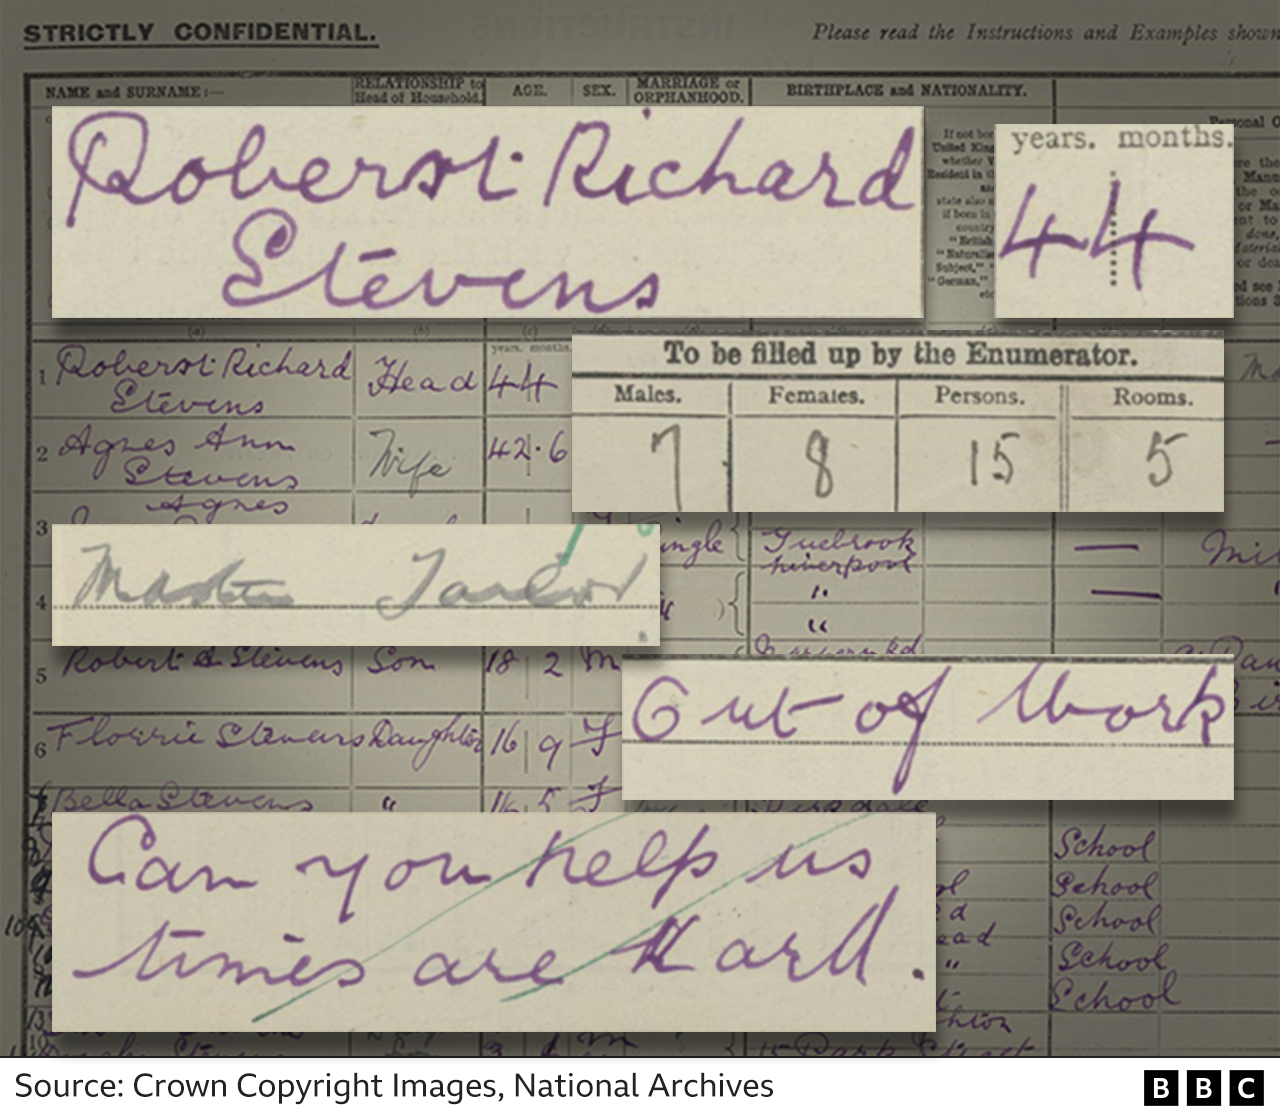 Extracts from Robert Steven's 1921 Census form